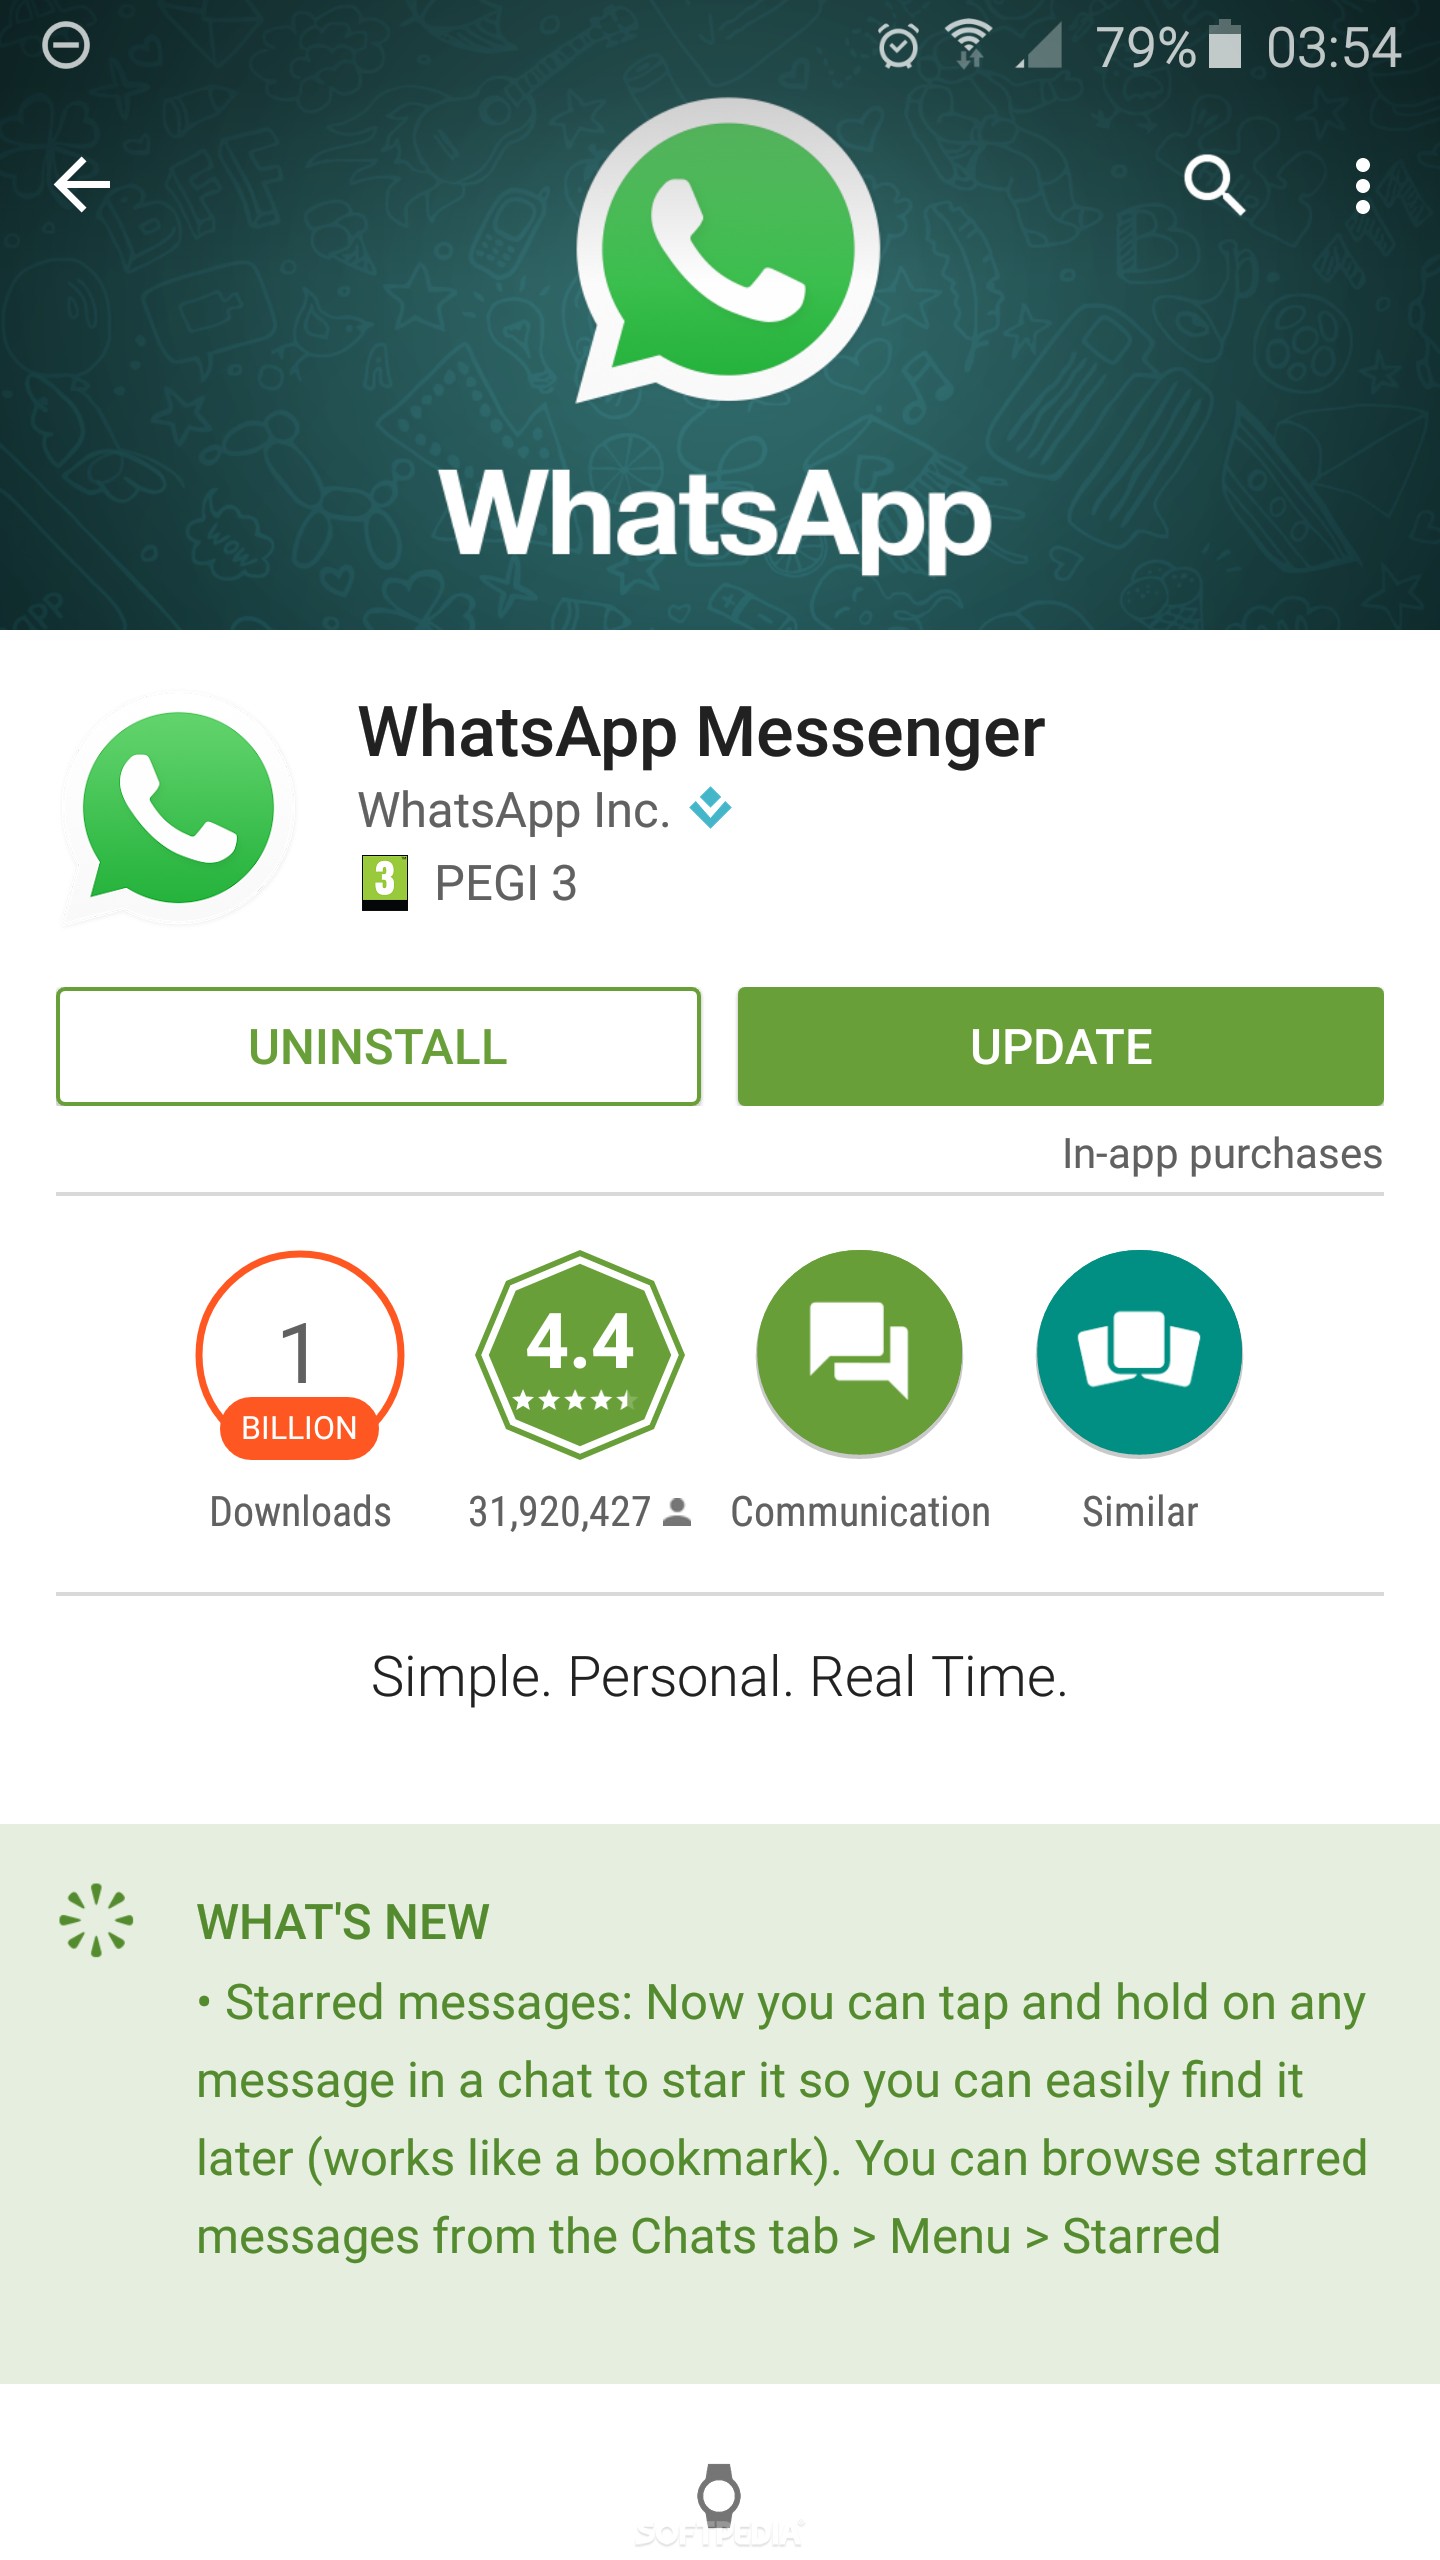 whatsapp app download 2018 new version android